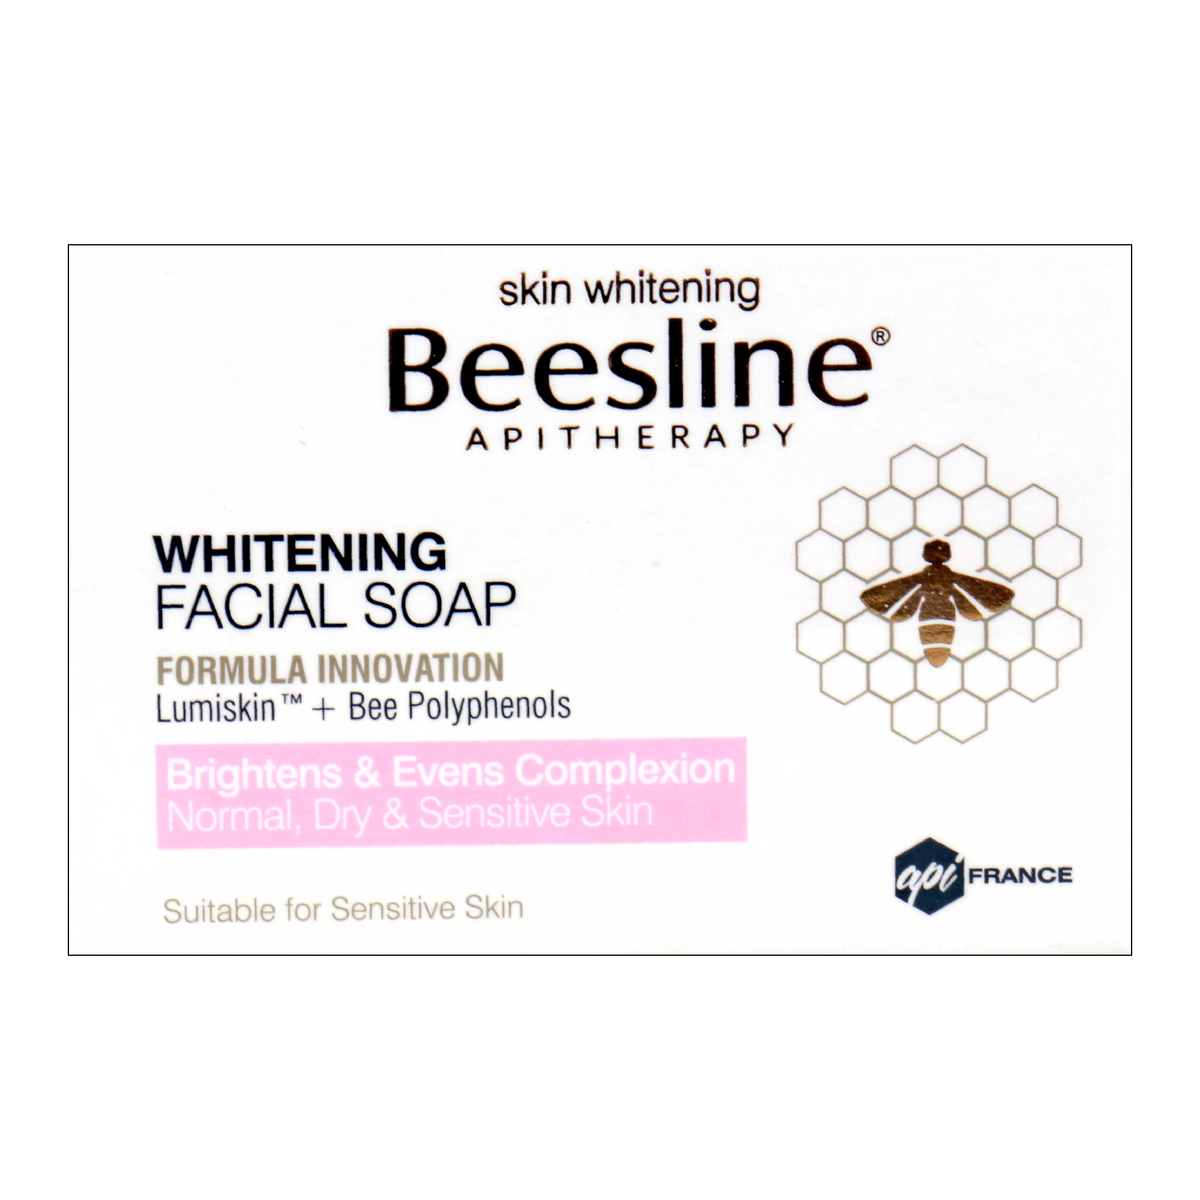 Beesline Facial Soap Whitening 85g